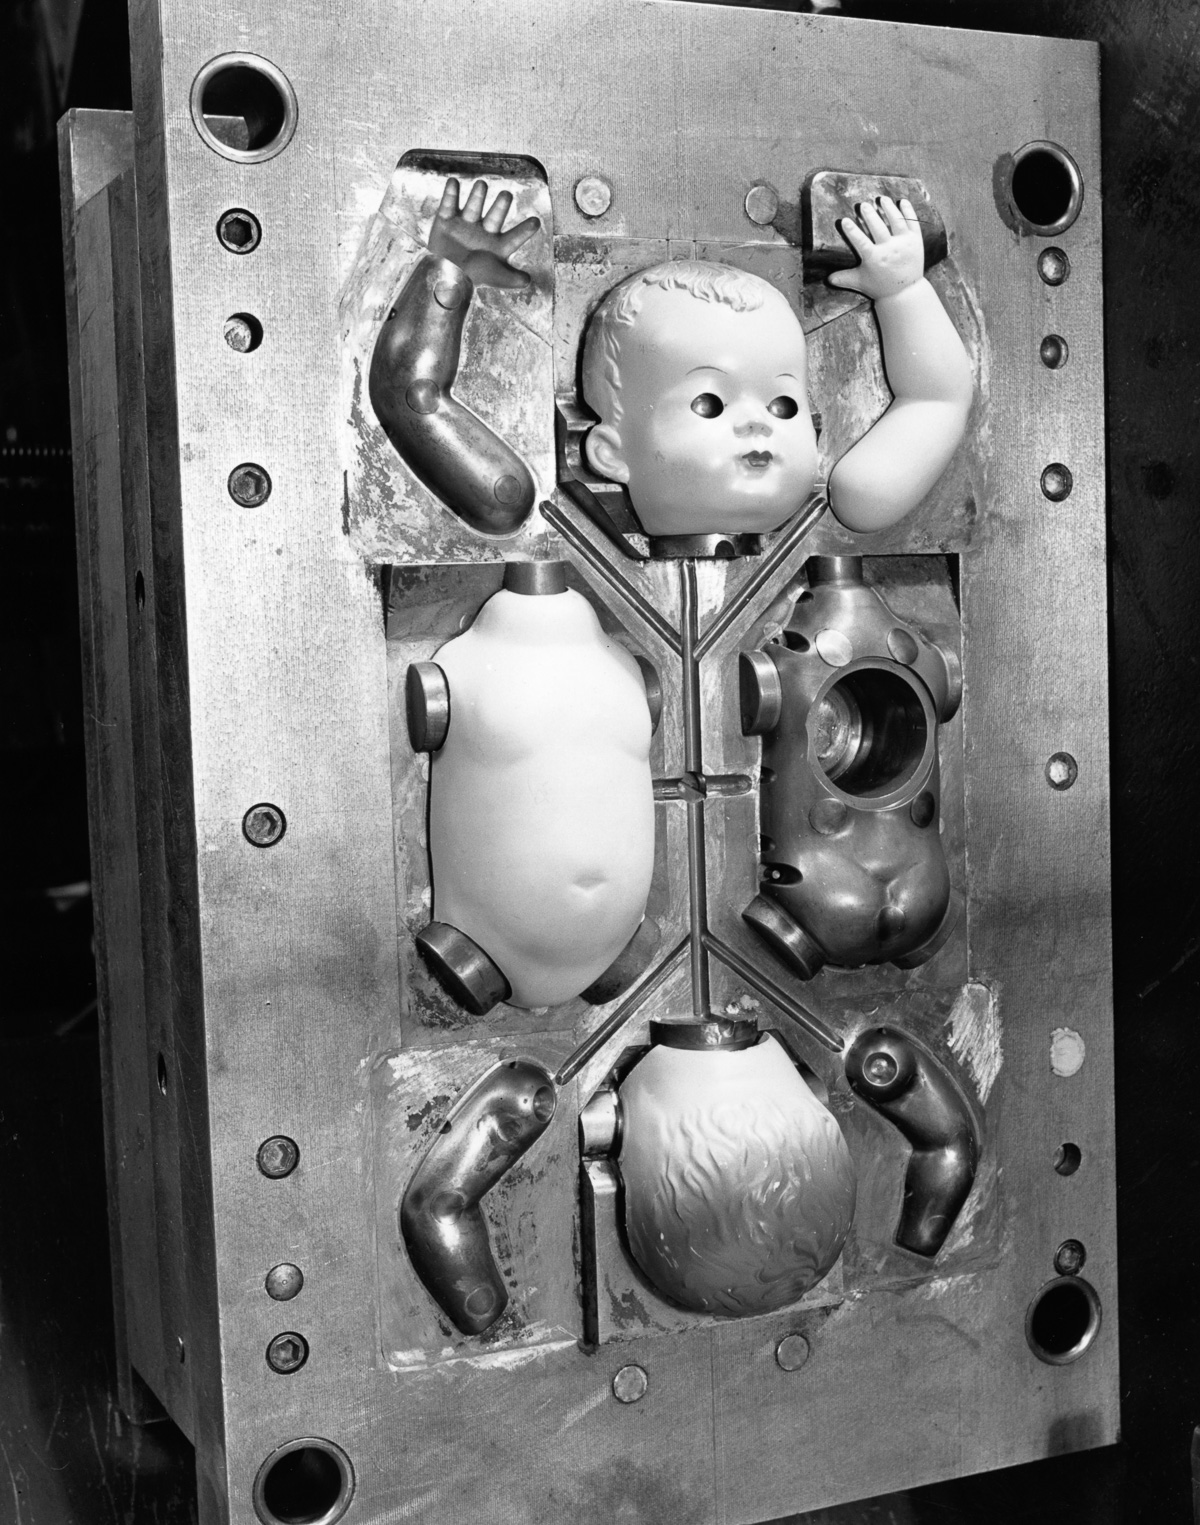 15th December 1951: Parts of a doll in an injection mould at Cascelloid's factory at Leicester. Original Publication: Picture Post - 5617 - Toys Are Big Business - pub. 1951 (Photo by Kurt Hutton/Picture Post/Getty Images)